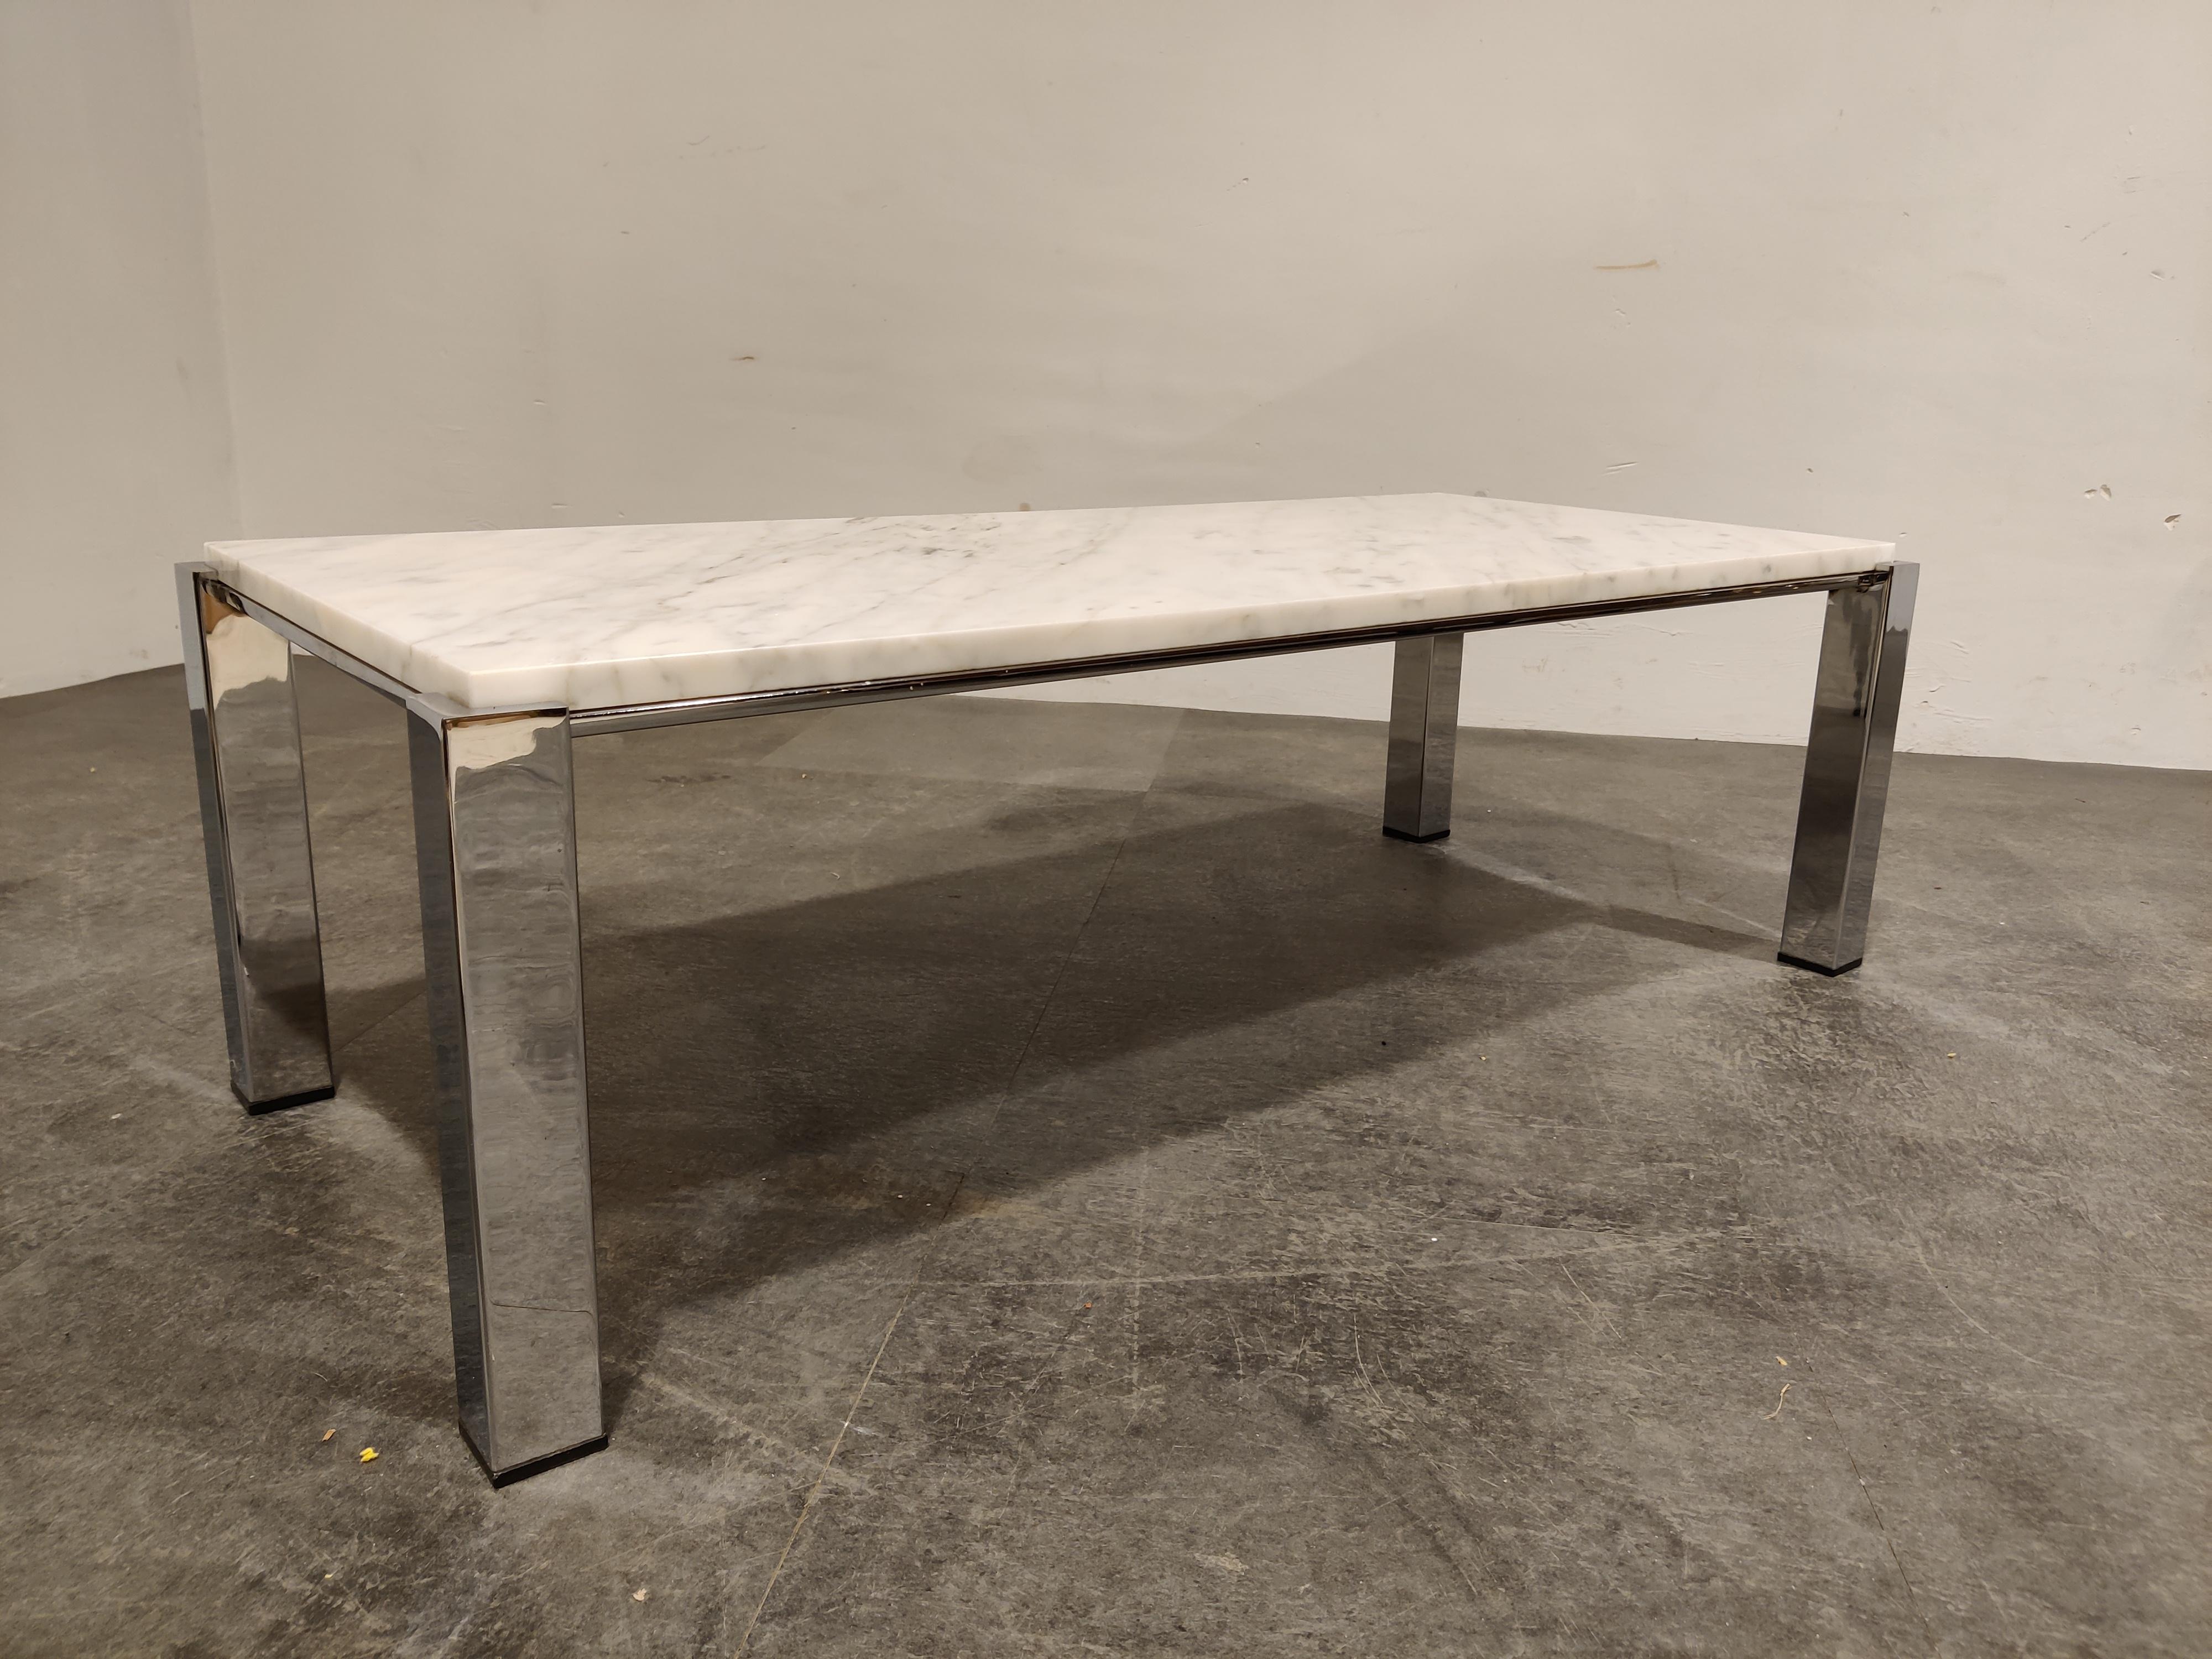 Vintage white marble coffee table with a chromed metal base.

Timeless piece to be combined with most interiors.

Good condition

1970s - Italy 

Measures: Height: 35cm/13.77